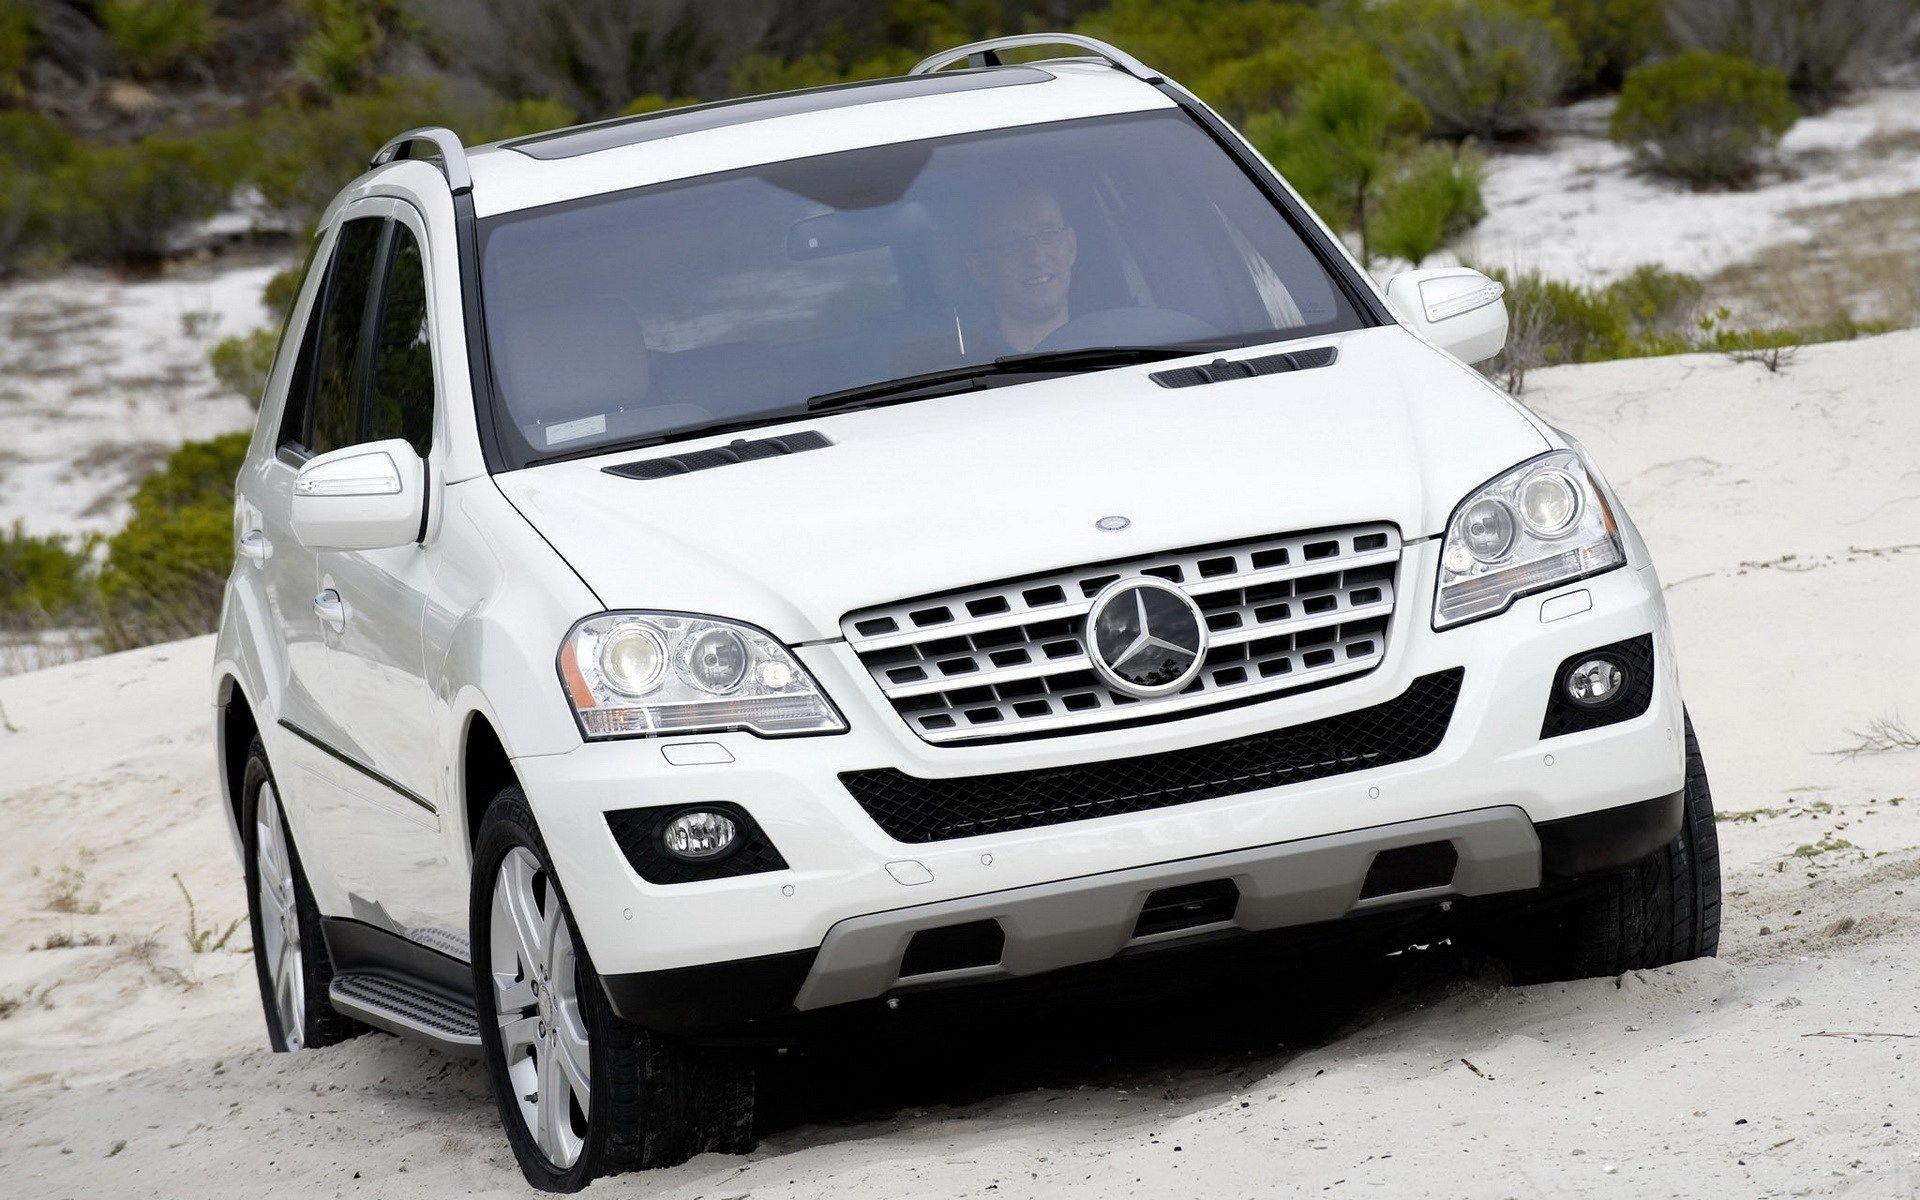 Mercedes Benz Ml320 Wallpaper And Image Wallpaper Picture